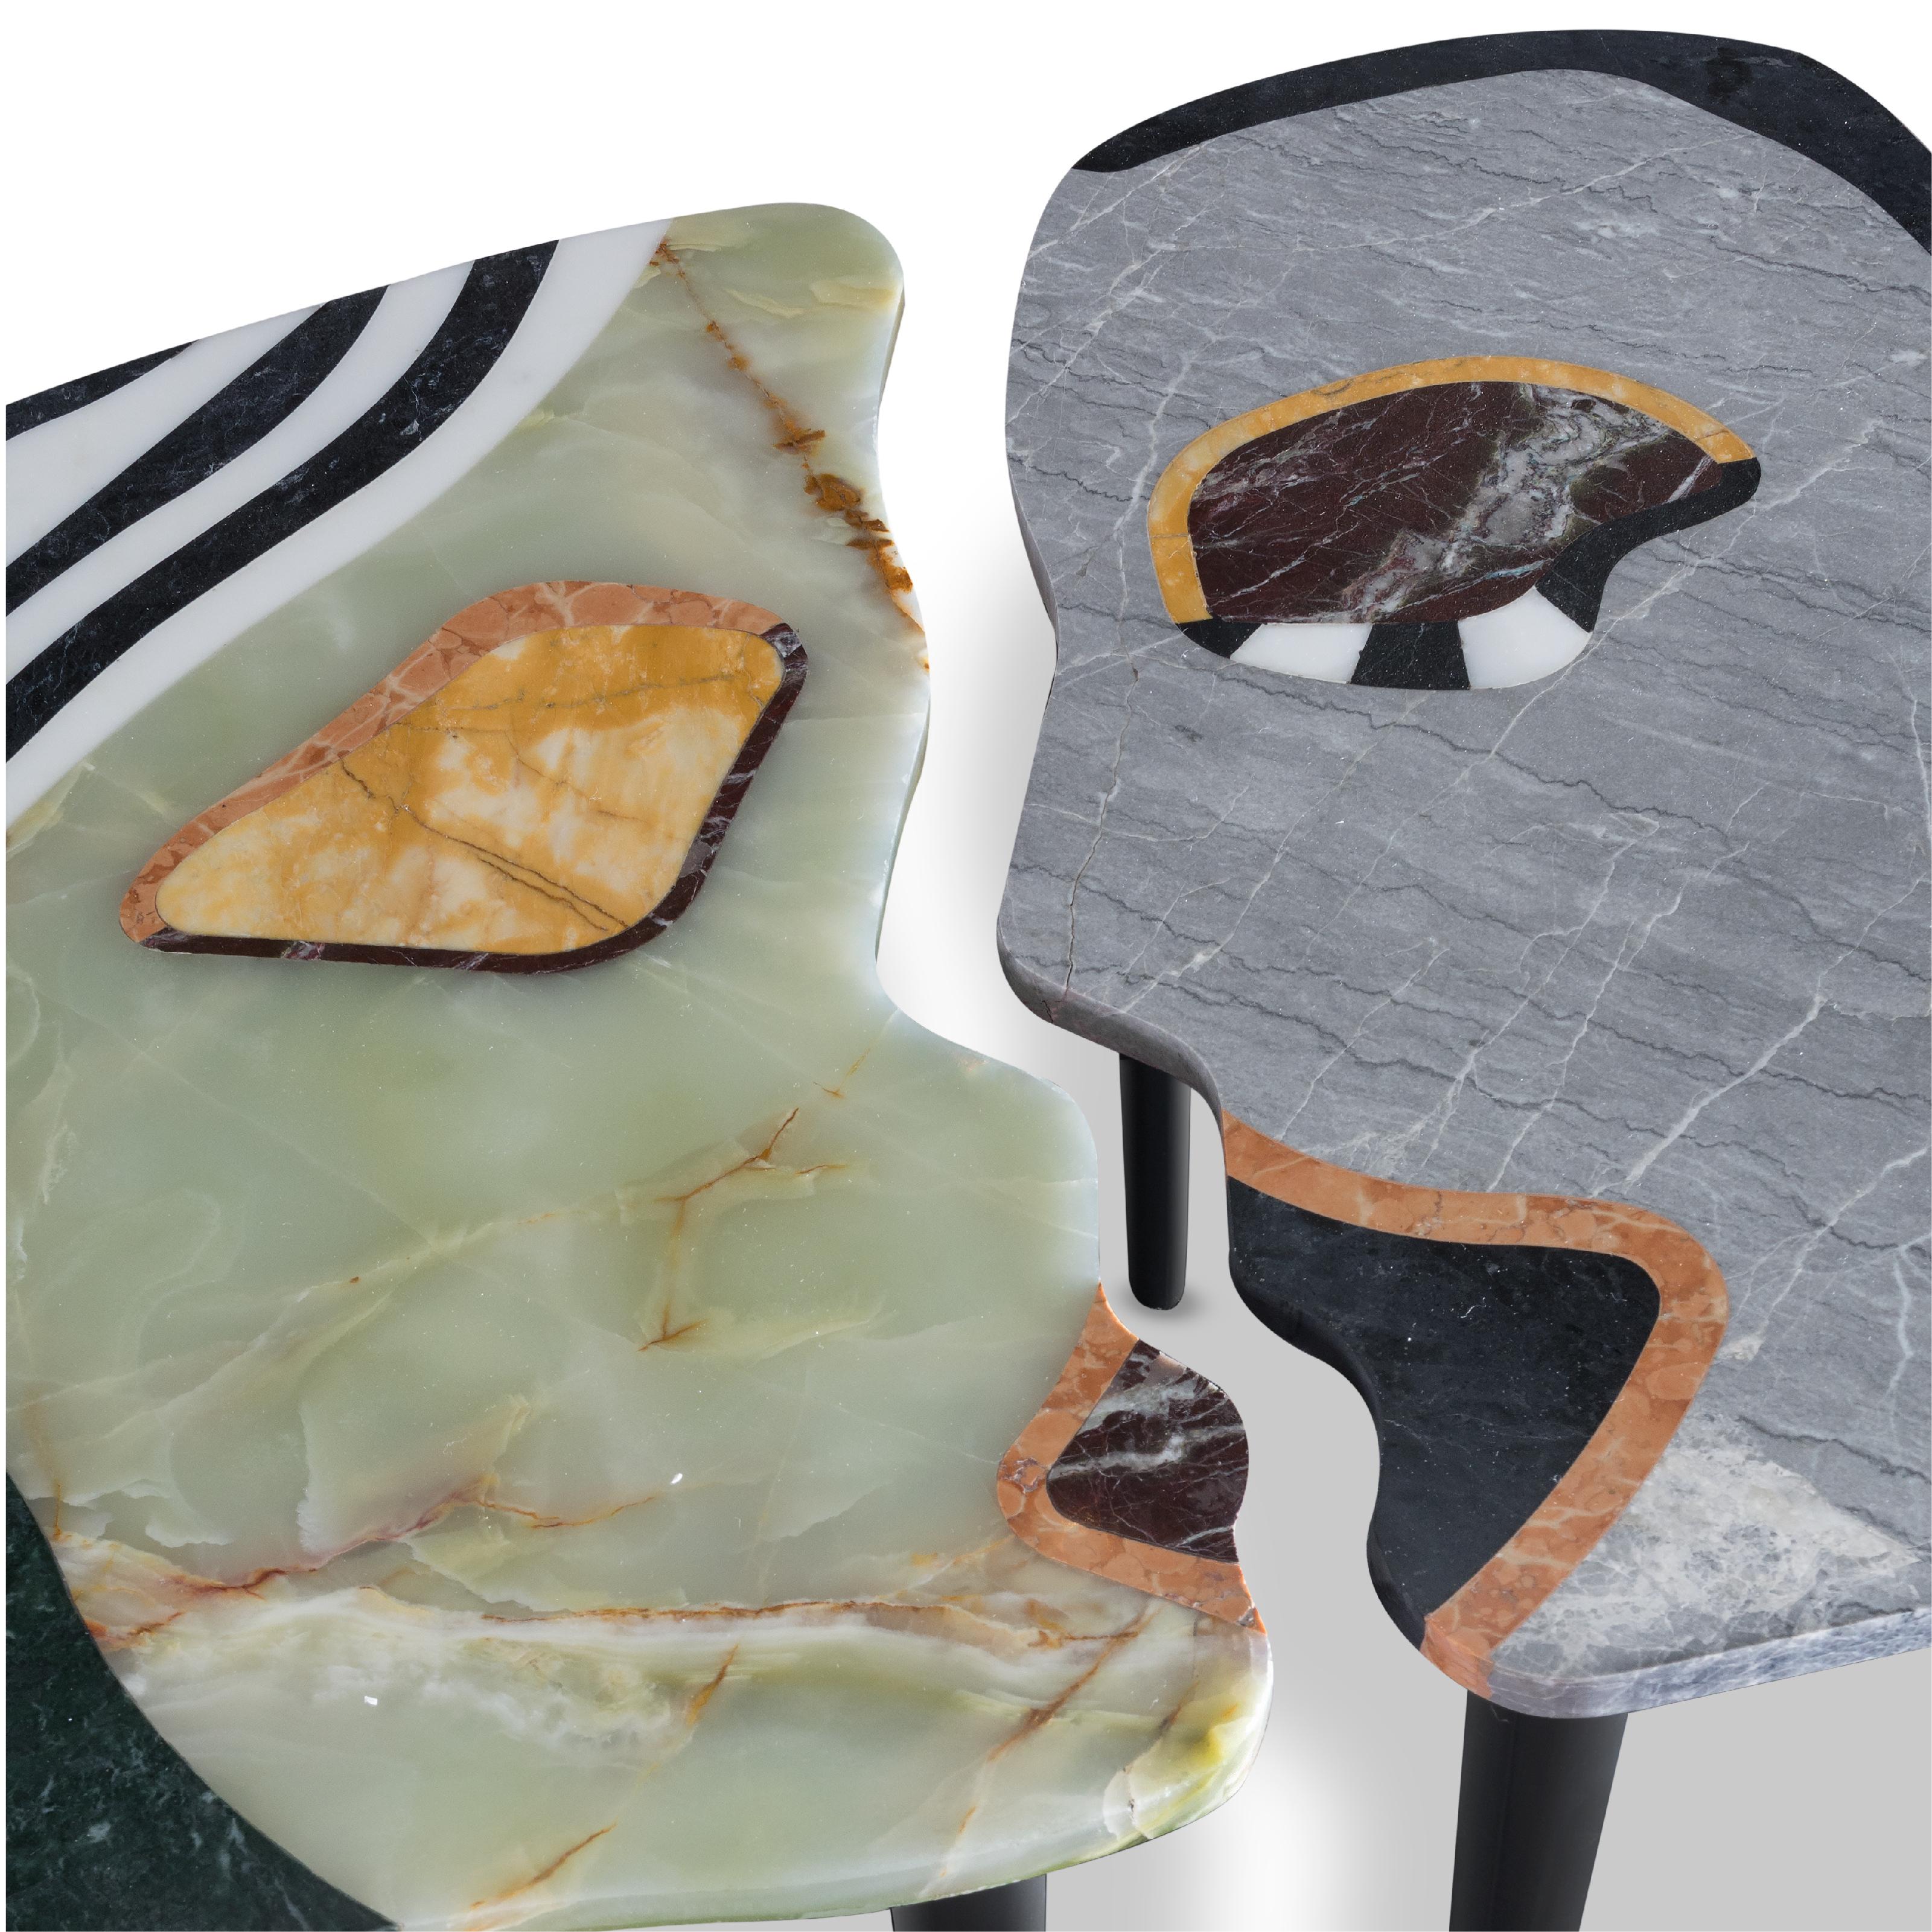 Artistic Man And Woman Face Marble And Metal Coffee Table 
woman and man face made of multicolor marble 
black, white and green marble
The “Inseparable” tables are just that: inseparable. They complement each other in a clever and understated